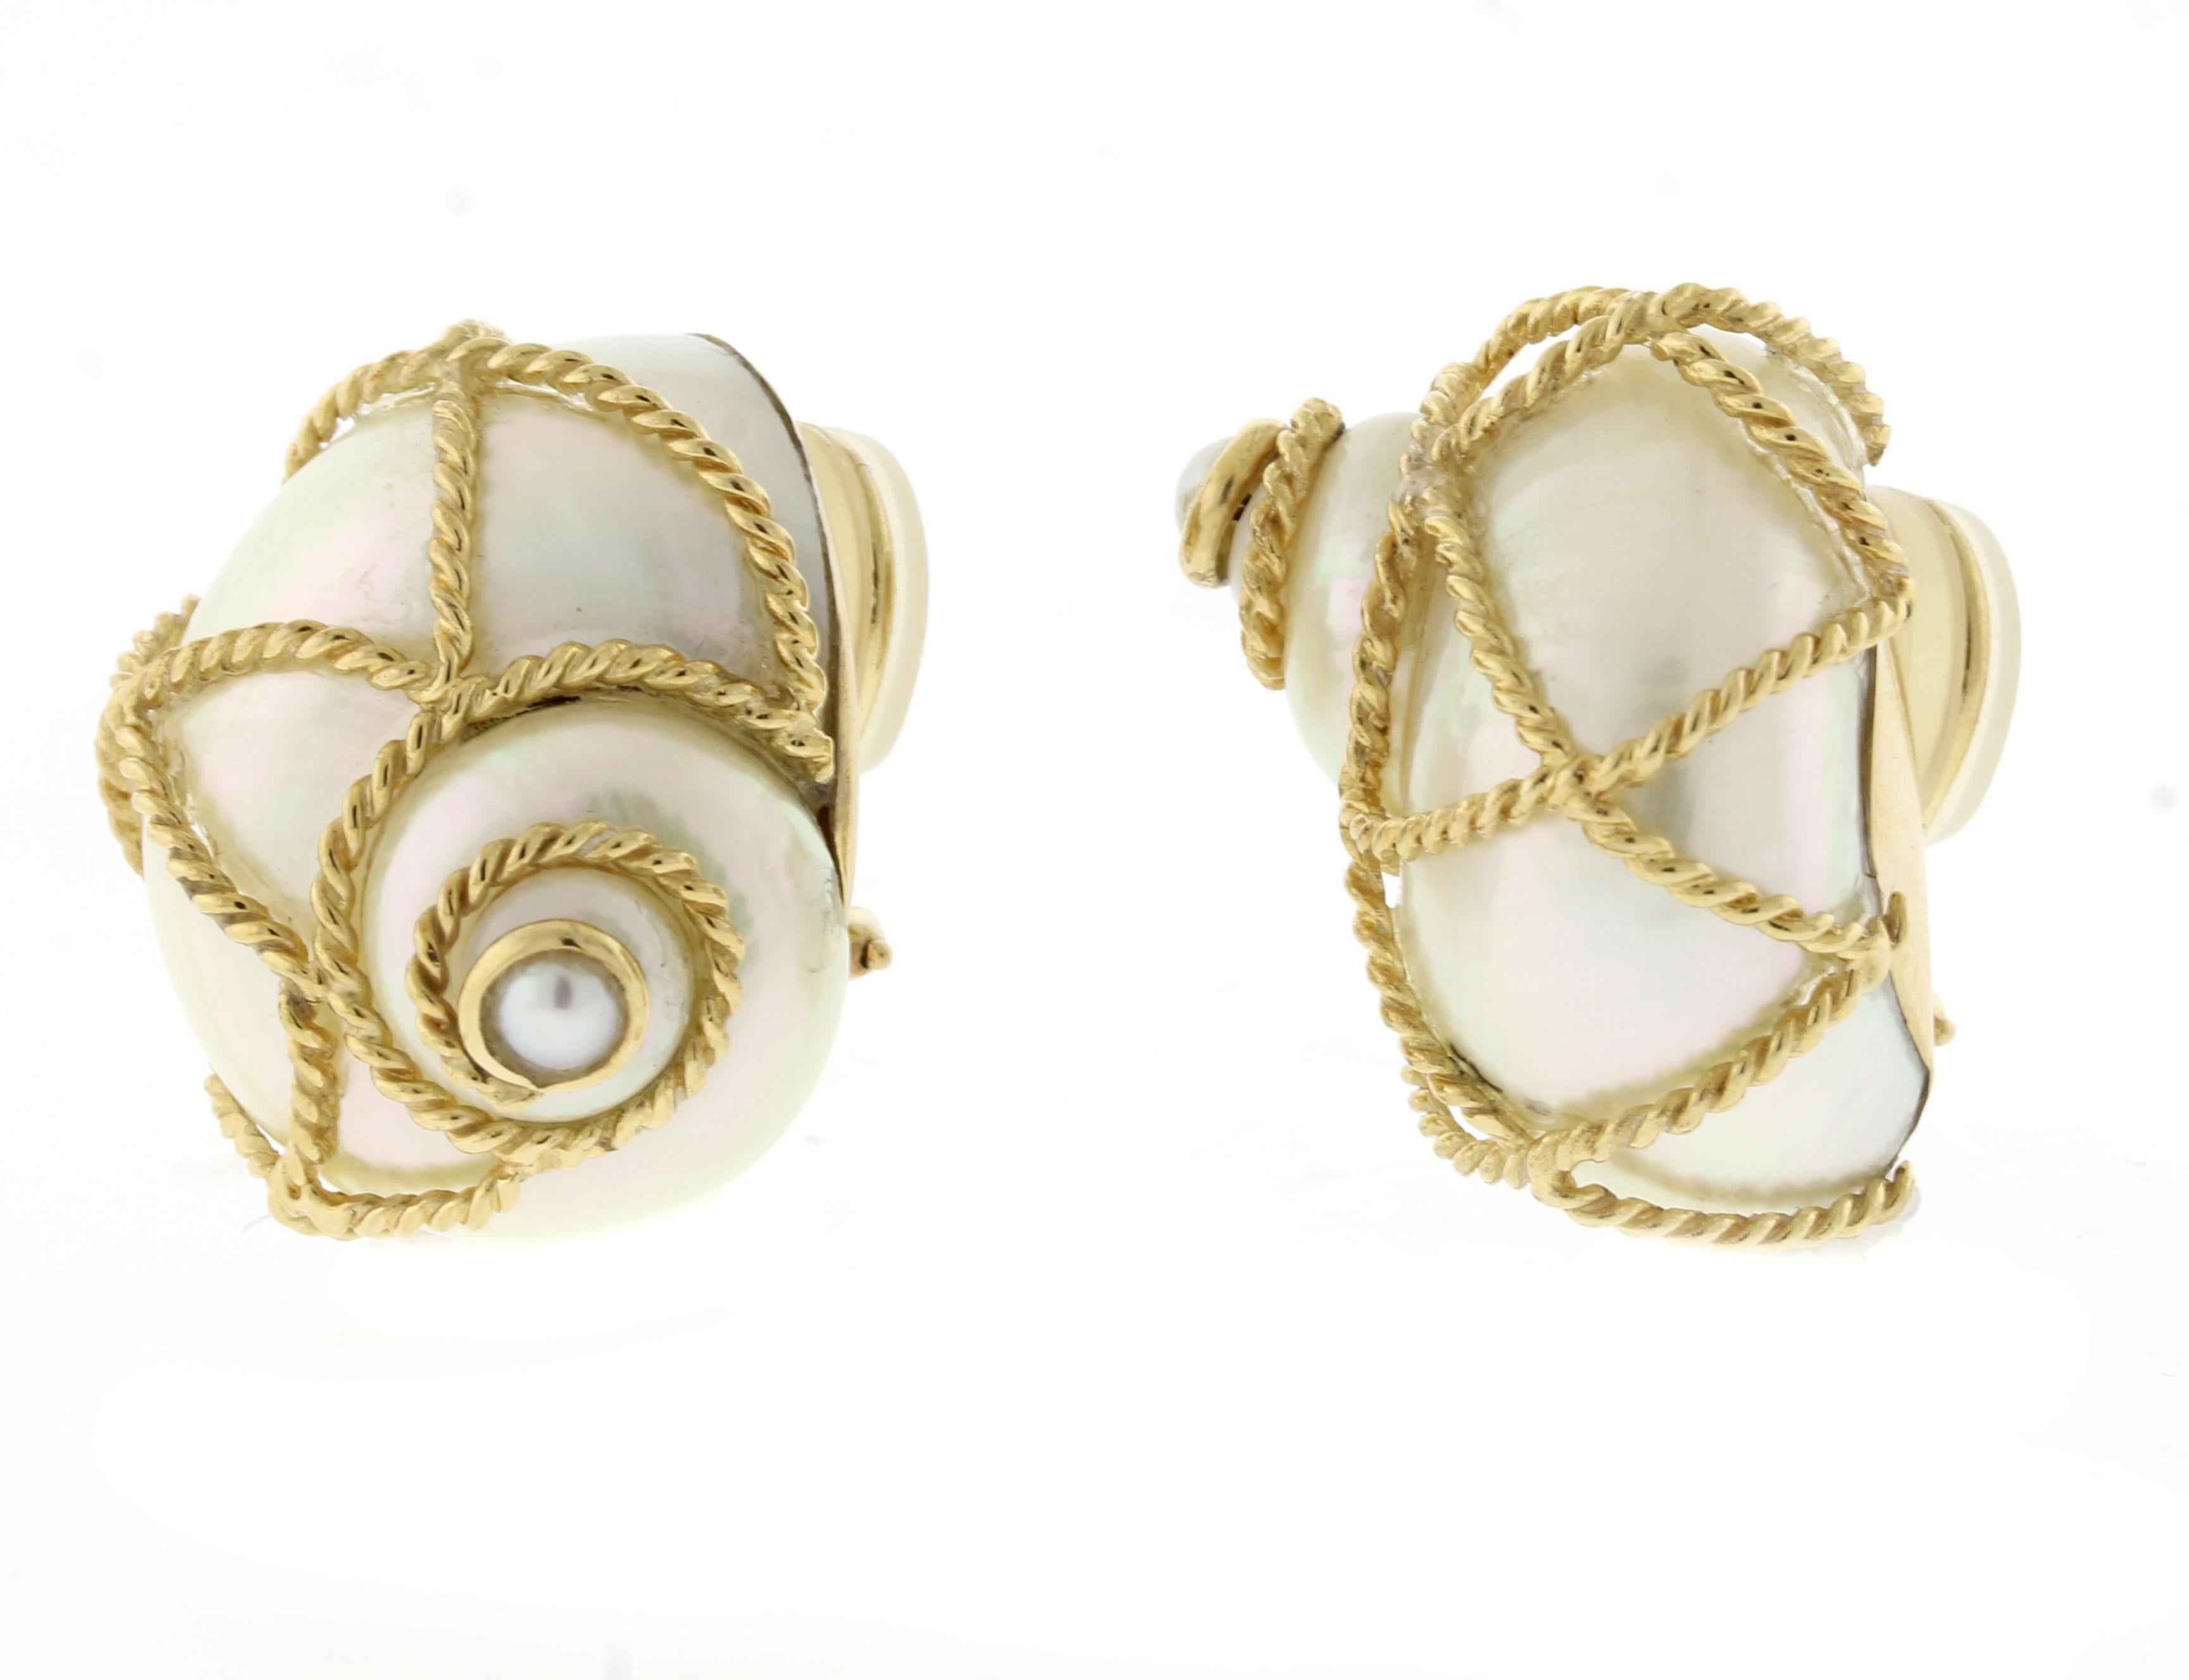 Natural shell clip-on earring 
• Designer: MAZ	
• Metal: 14 karat gold
• Circa: 21st Century
• Size: 1 inch 
• Packaging: Pampillonia presentation box
• Condition: Excellent

